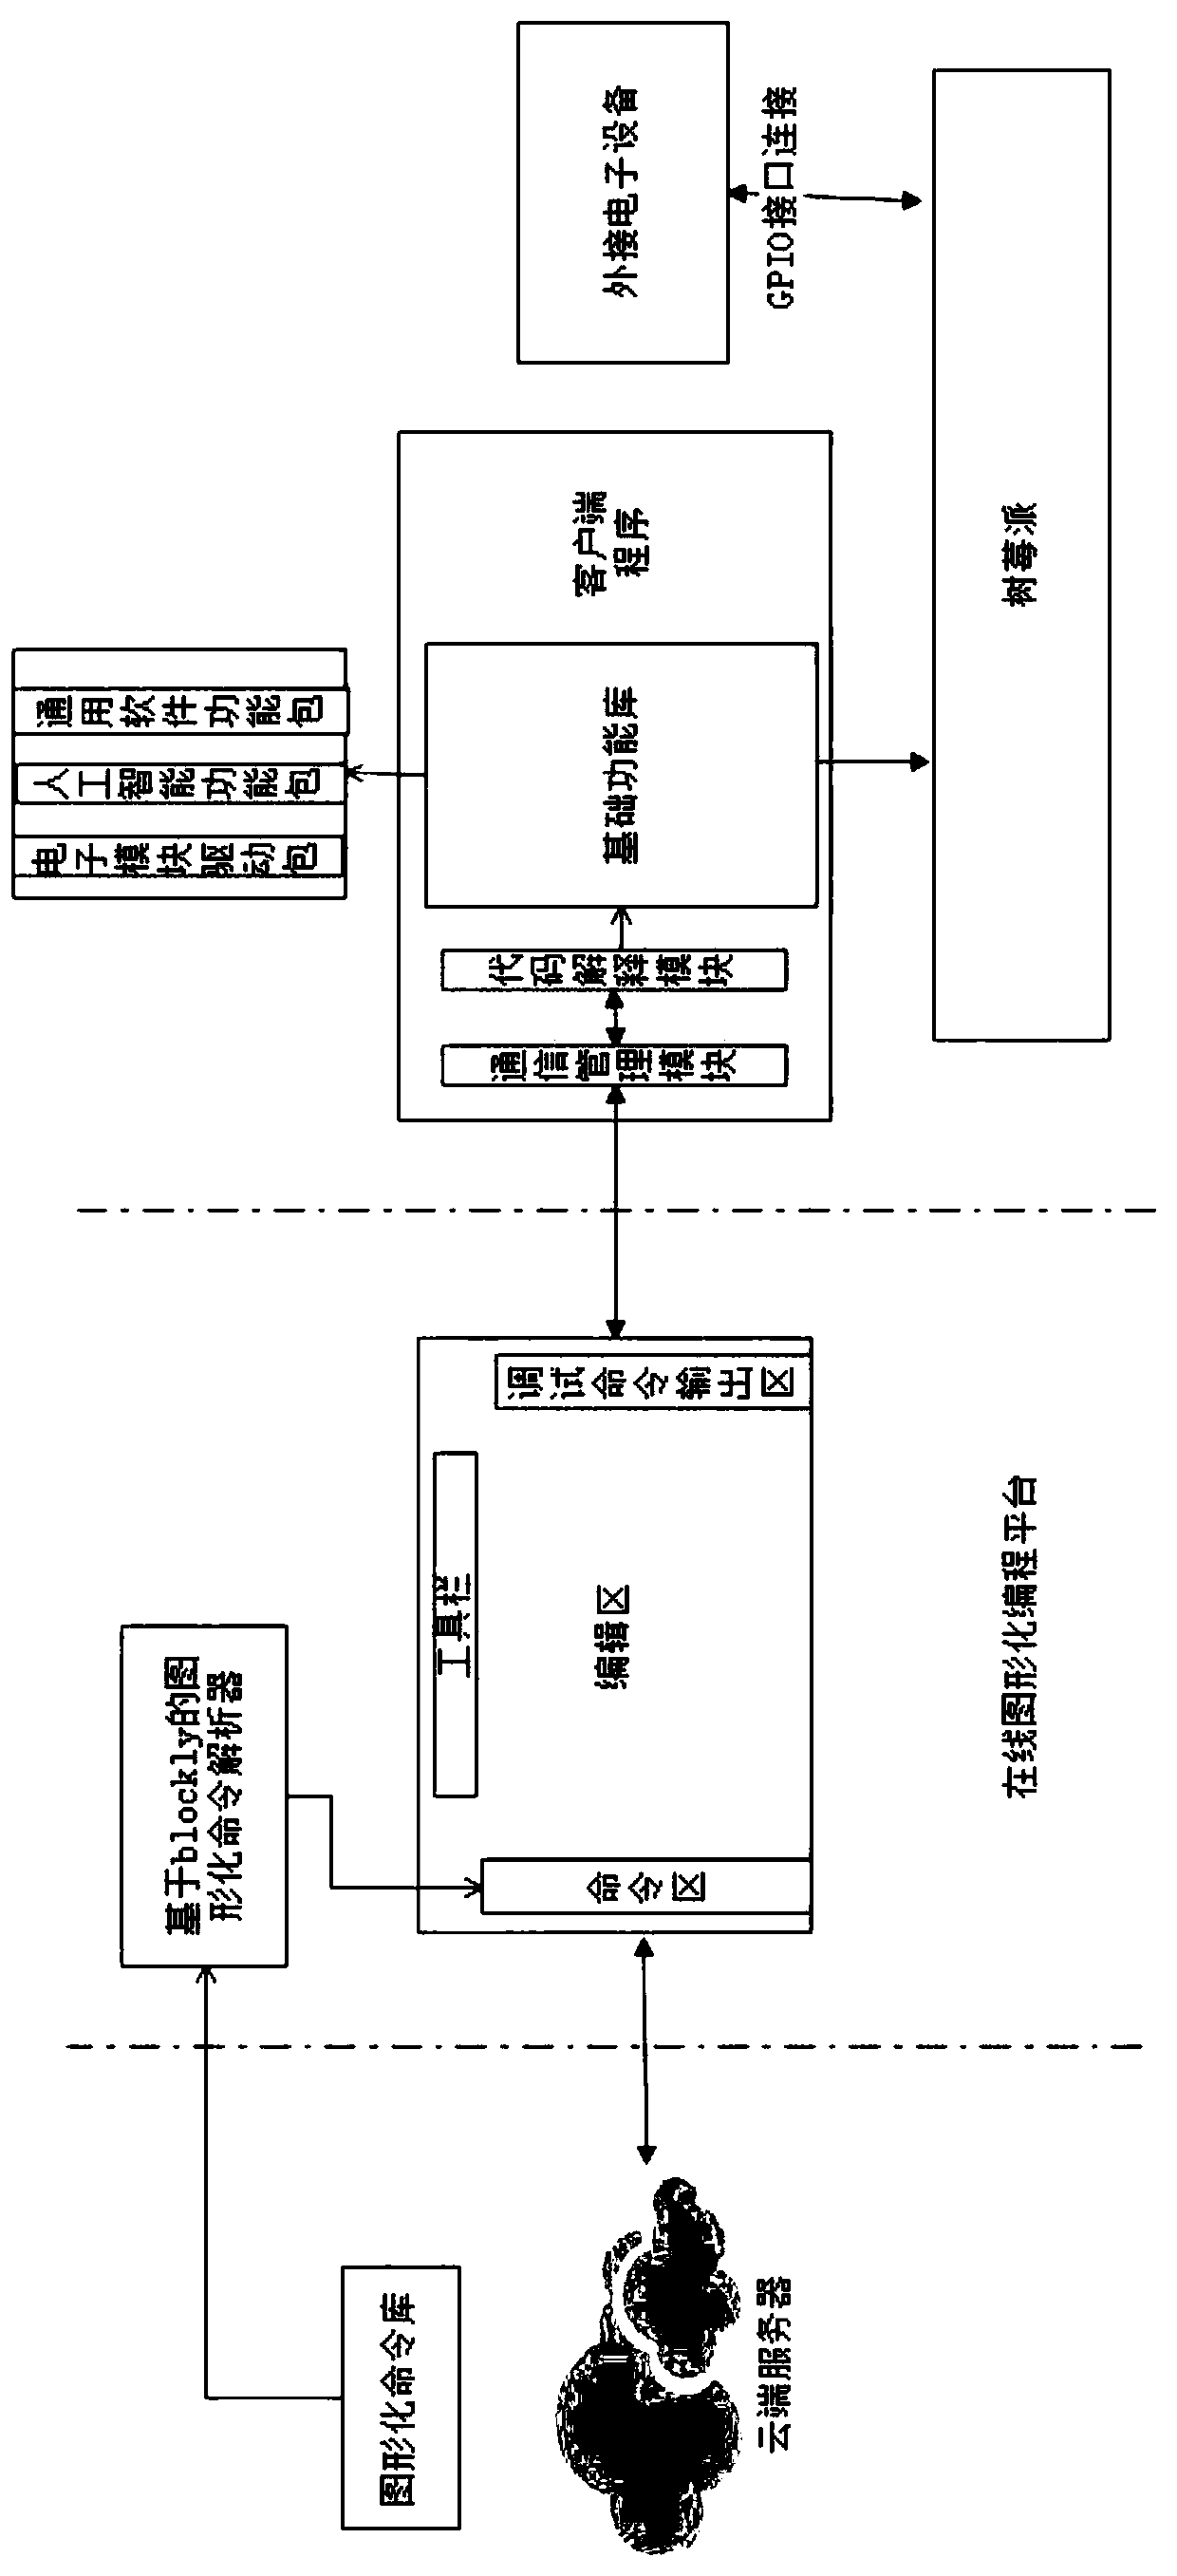 Blockly and Raspberry Pi-based online graphical programming system and usage method thereof